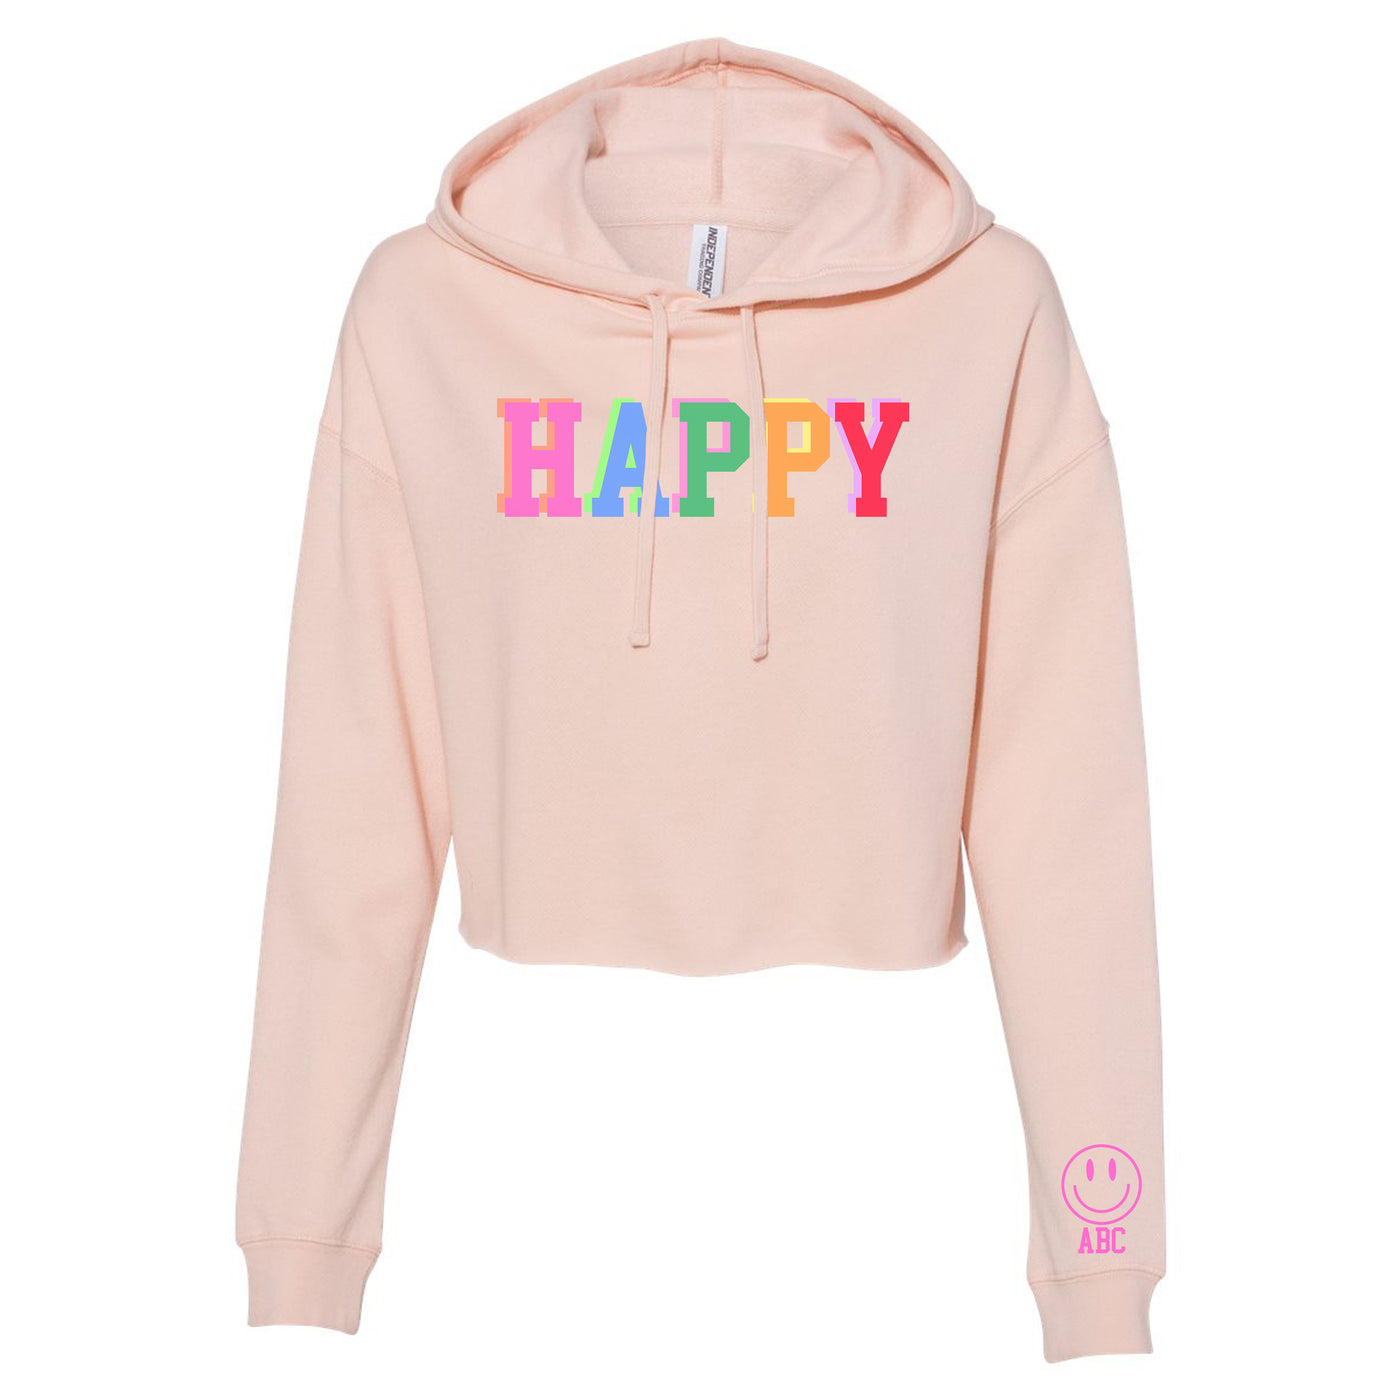 Initialed Sleeve Colorful Block 'Happy' Cropped Hoodie